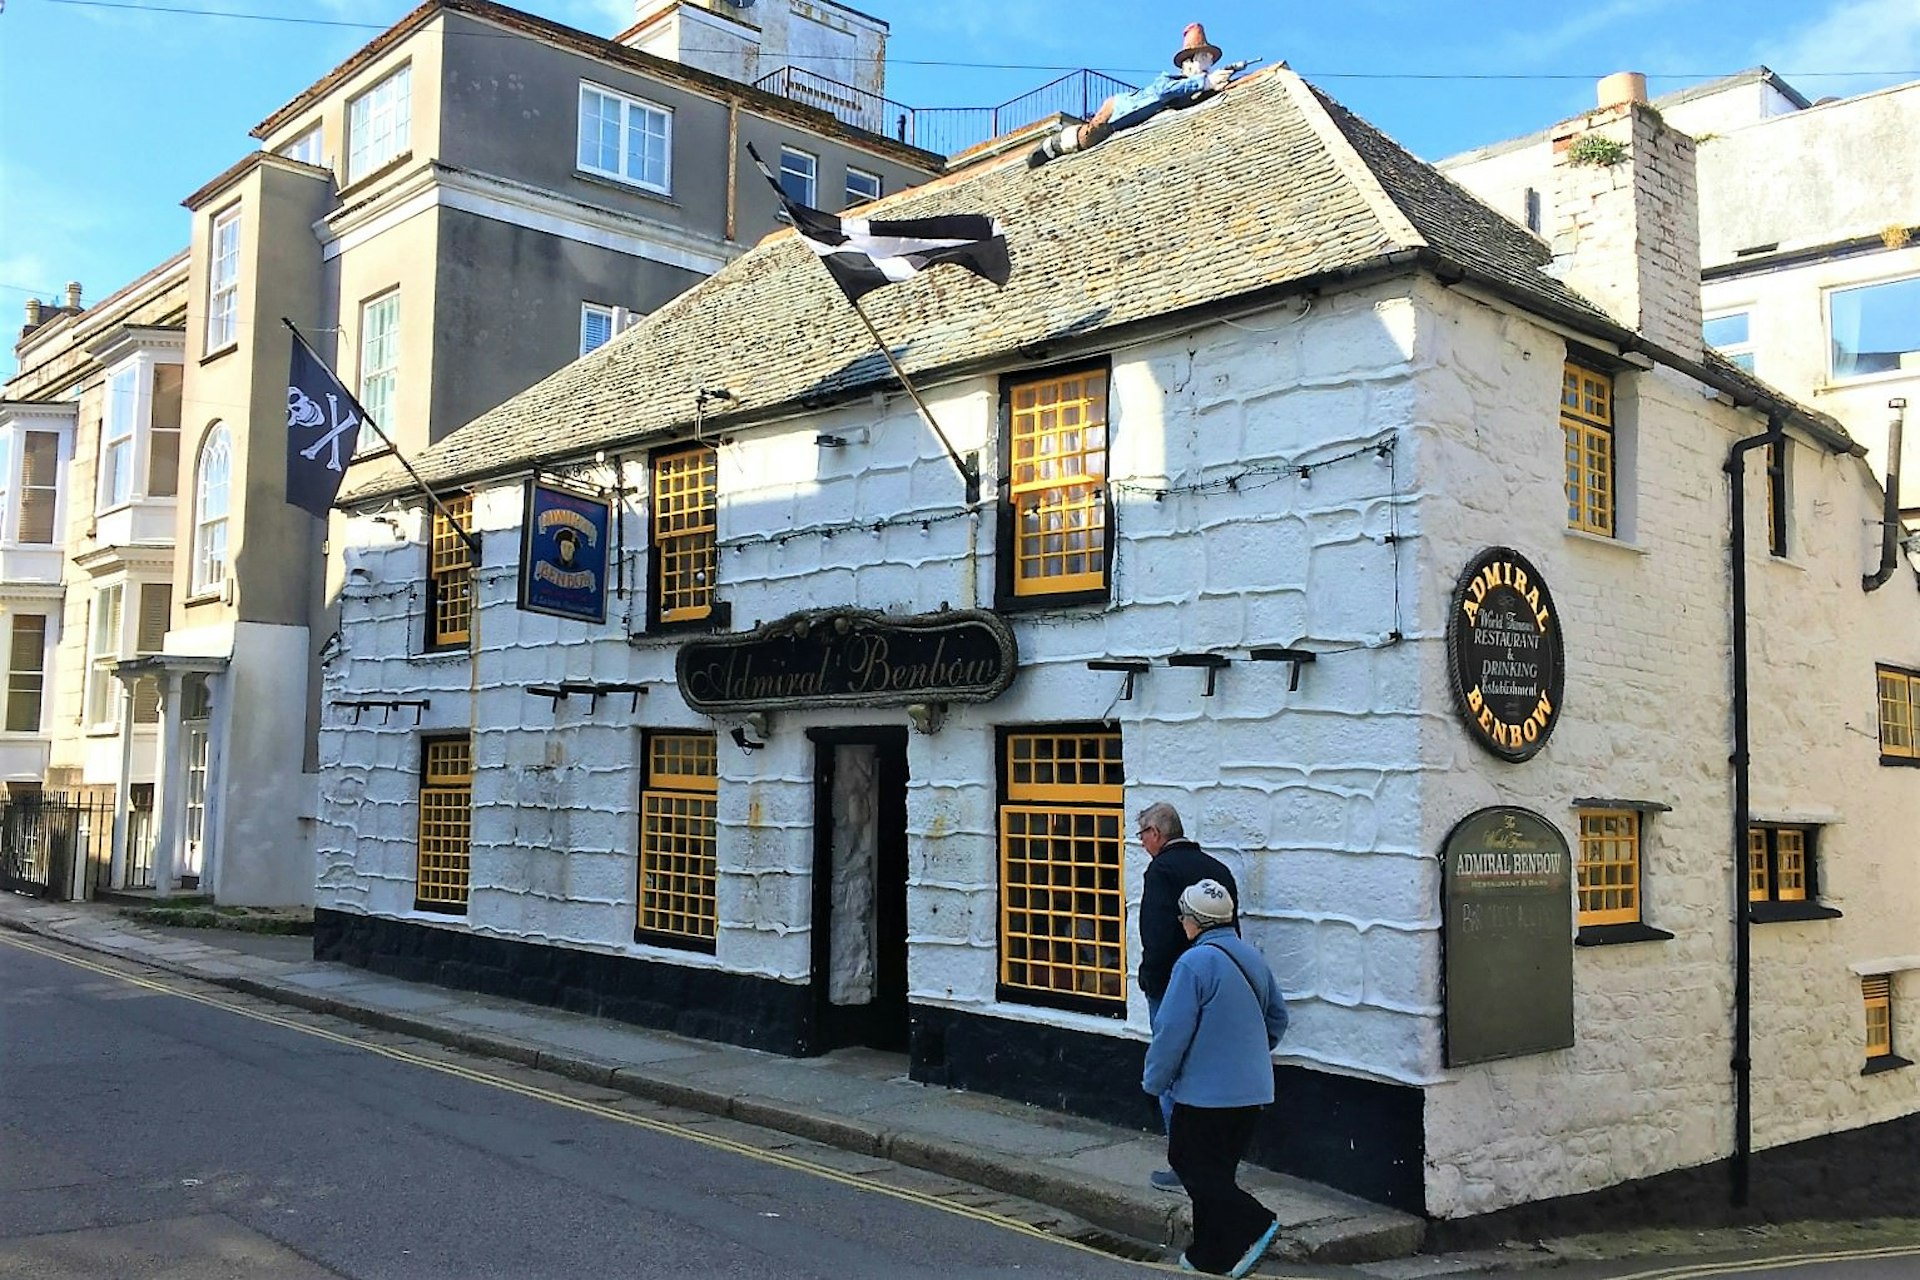 The Admiral Benbow is one of many historic pubs serving great food © Emma Sparks / Lonely Planet